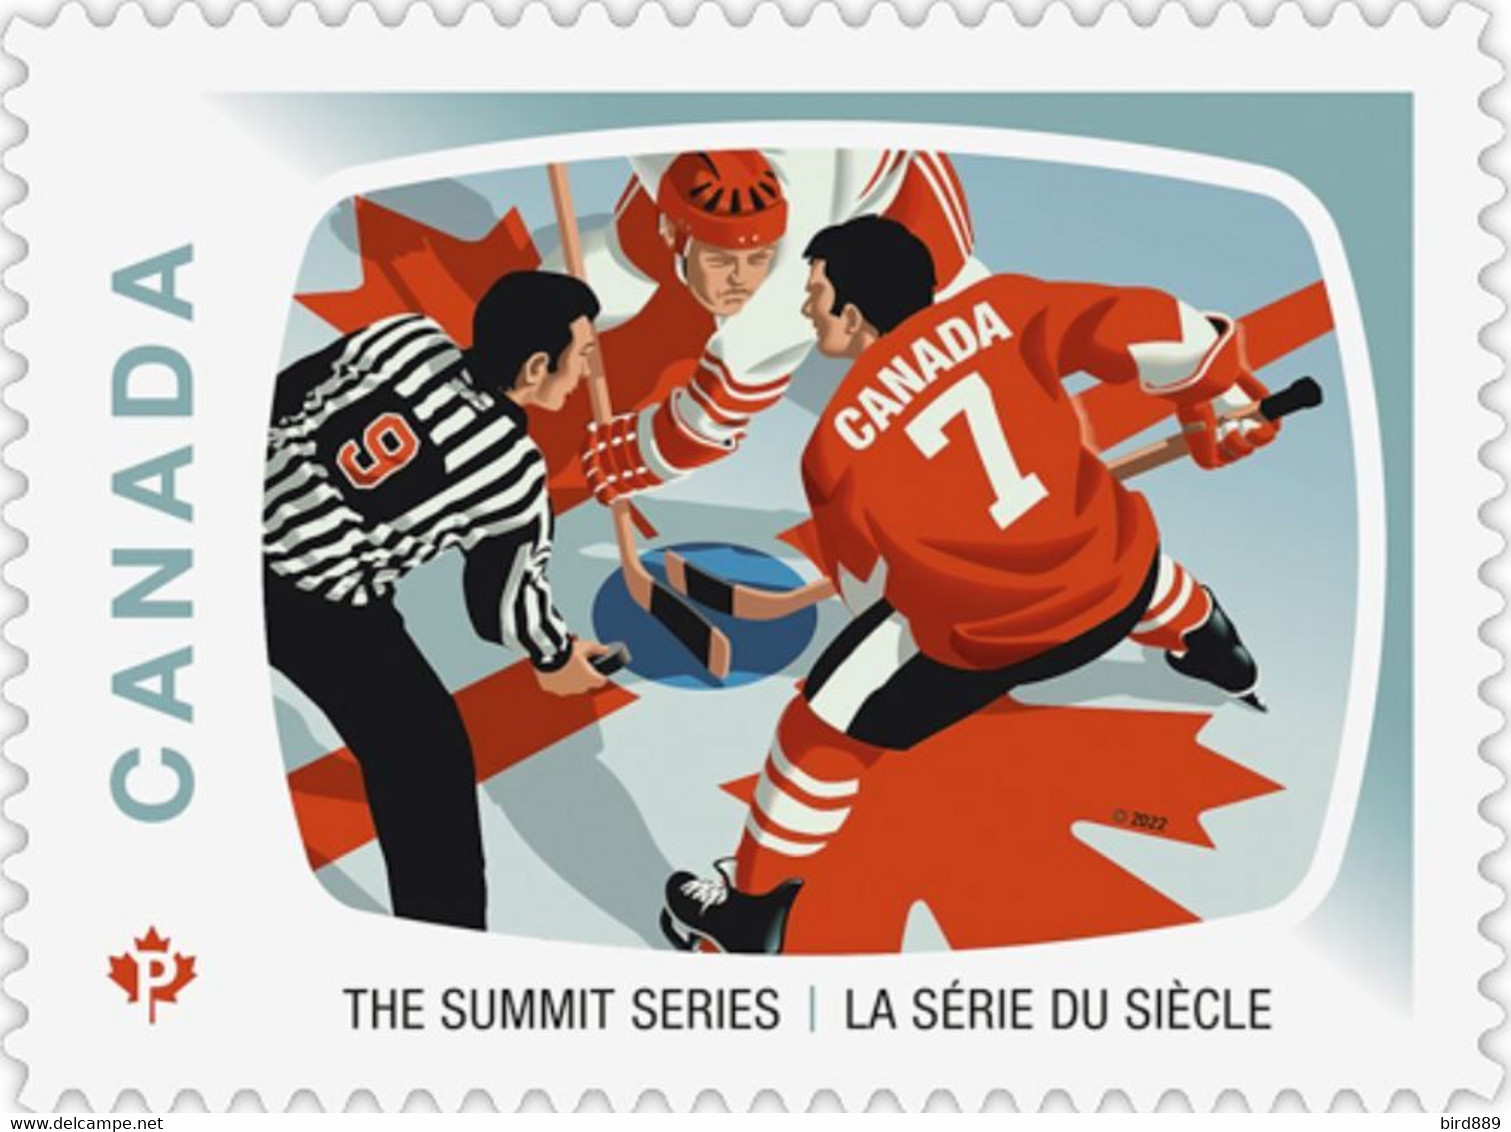 2022 Canada USSR Hockey The Summit Series Single Stamp From Booklet MNH - Postzegels